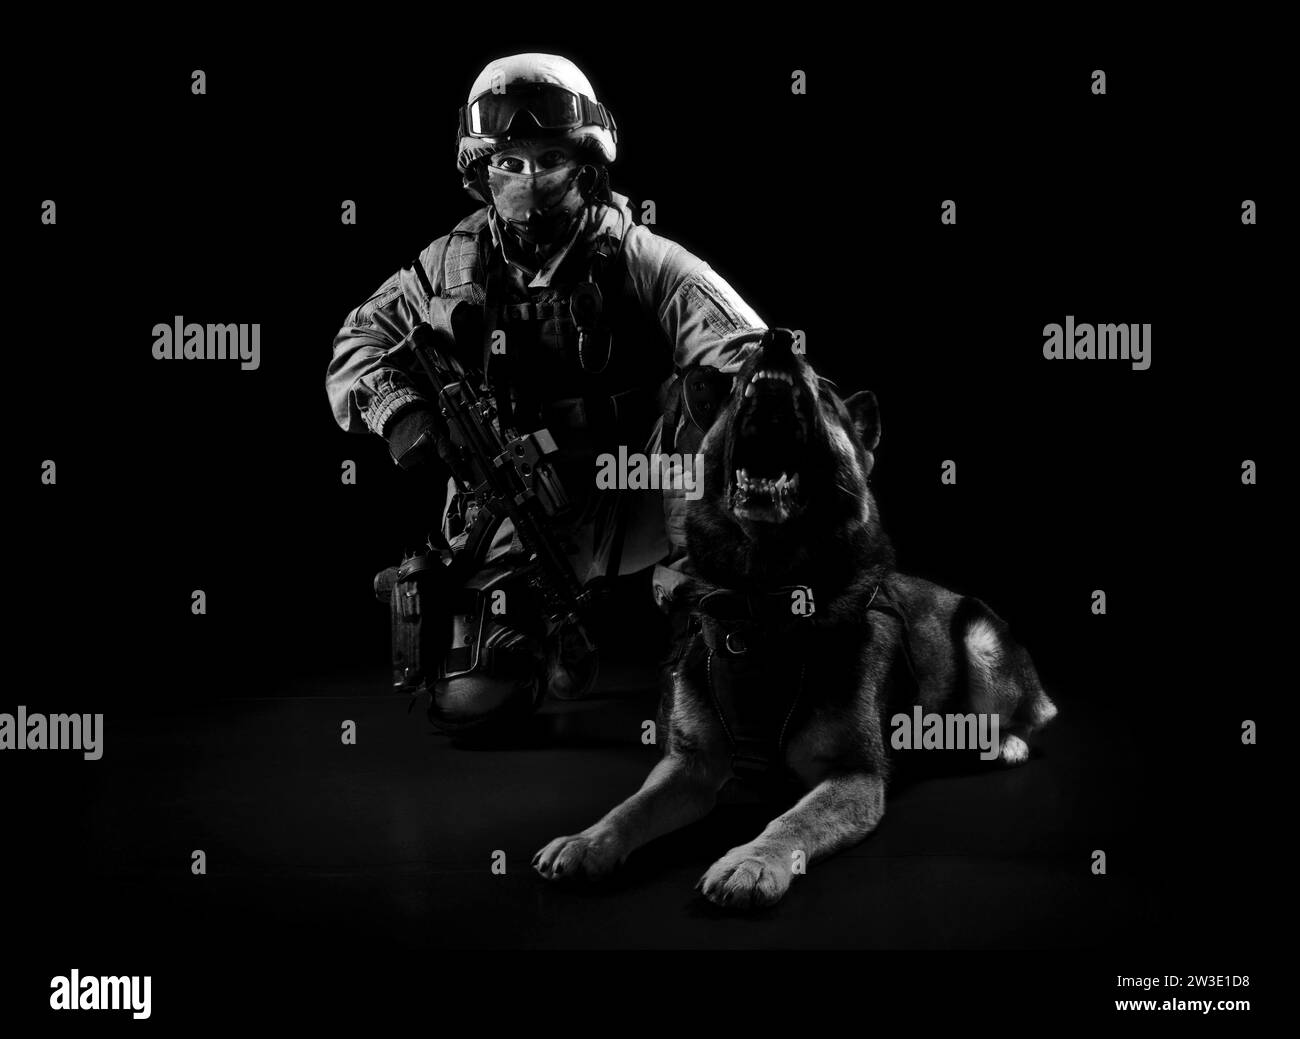 Armed man in military uniform sits next to a search dog. Mixed media Stock Photo